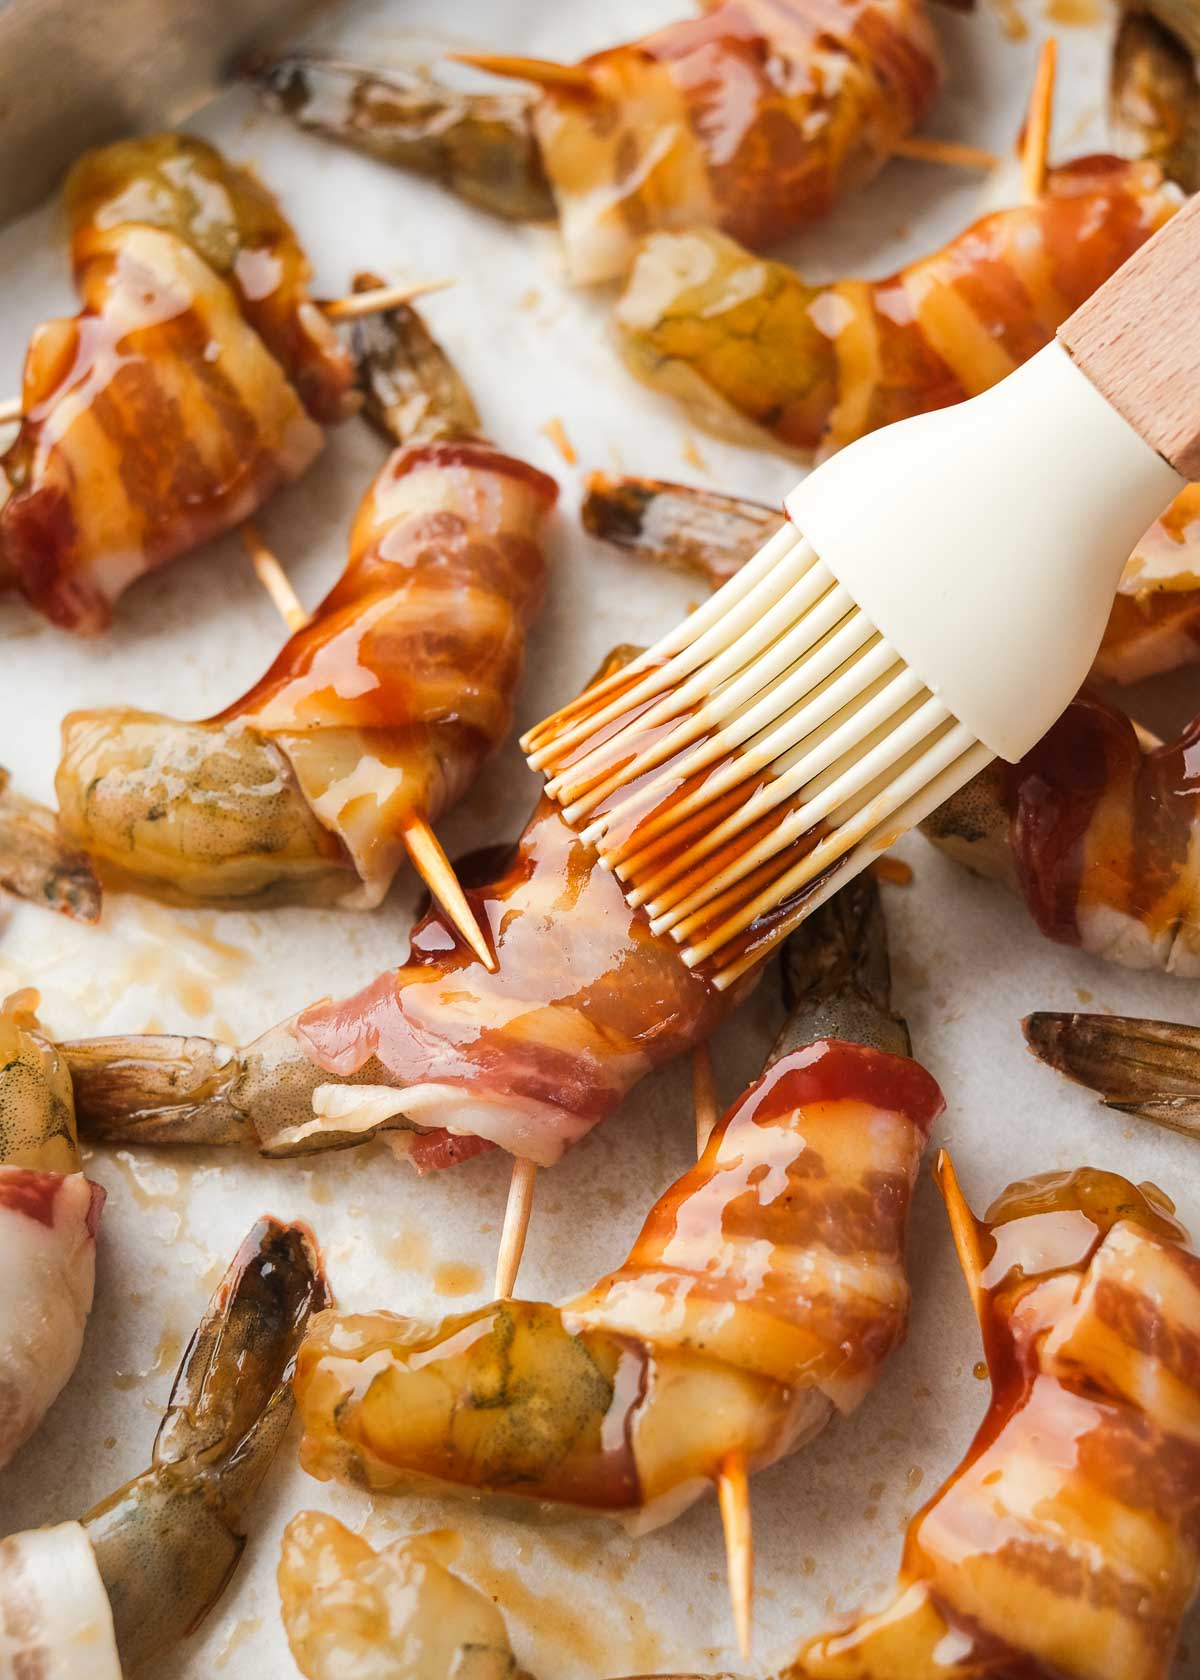 brush bacon wrapped shrimp with bbq sauce, sweetener, and vinegar mixture